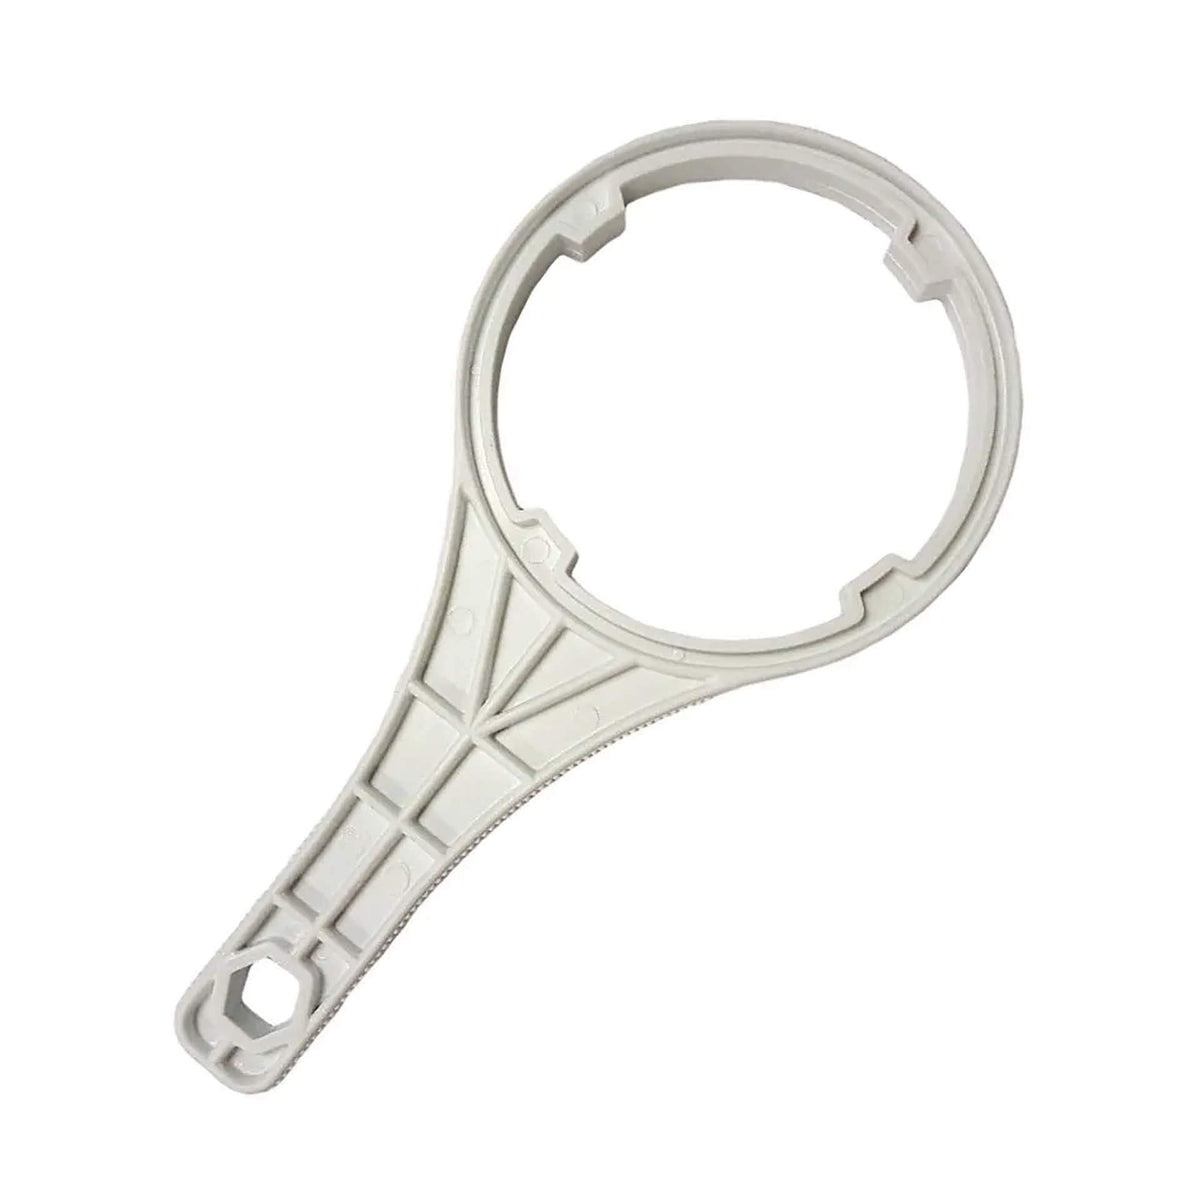 Reefpure RO Systems 10” X 2.5” Housing Wrench